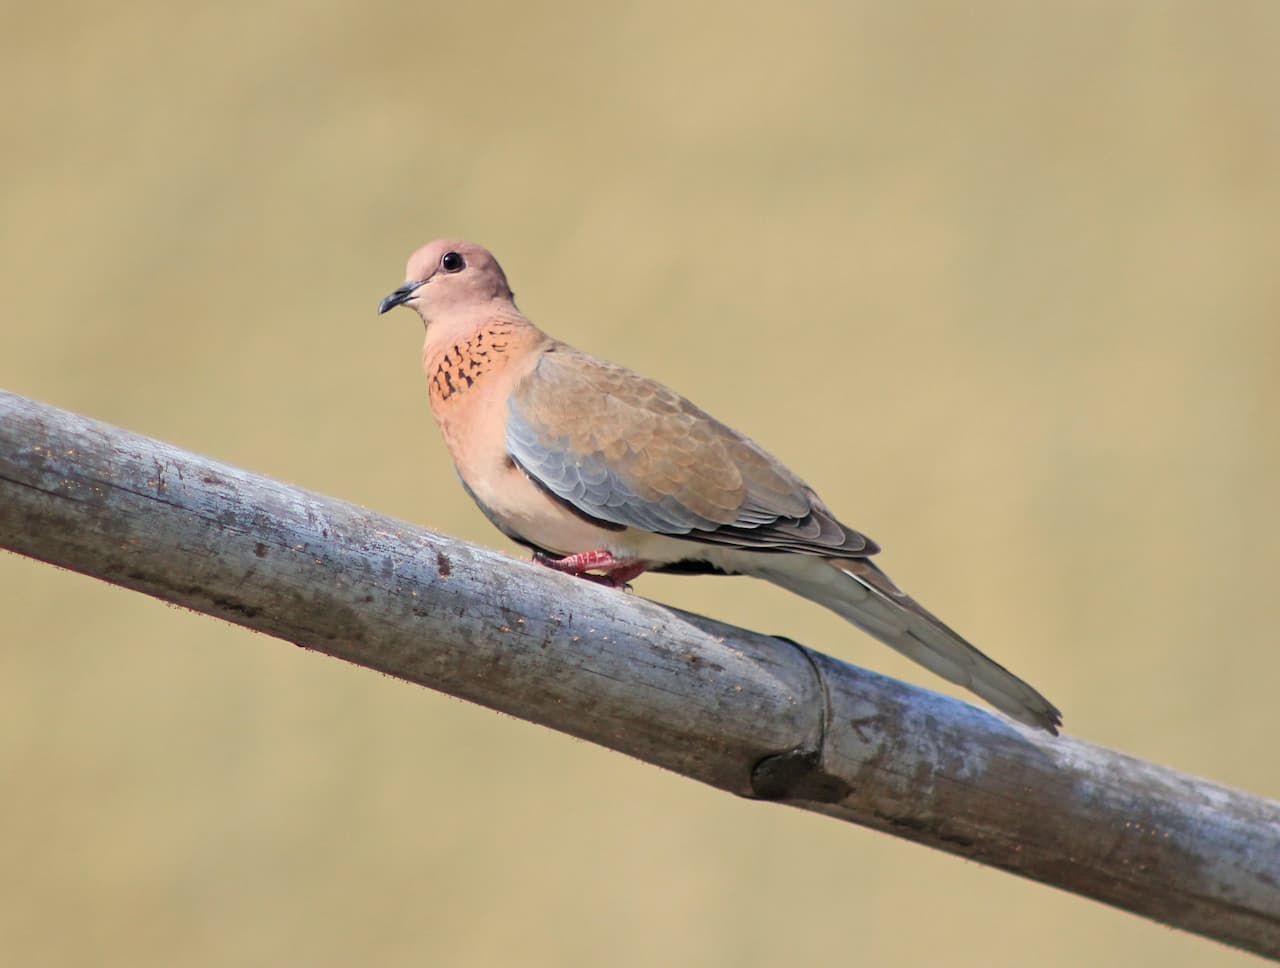 A Senegal Dove sitting on a tree branch alone.